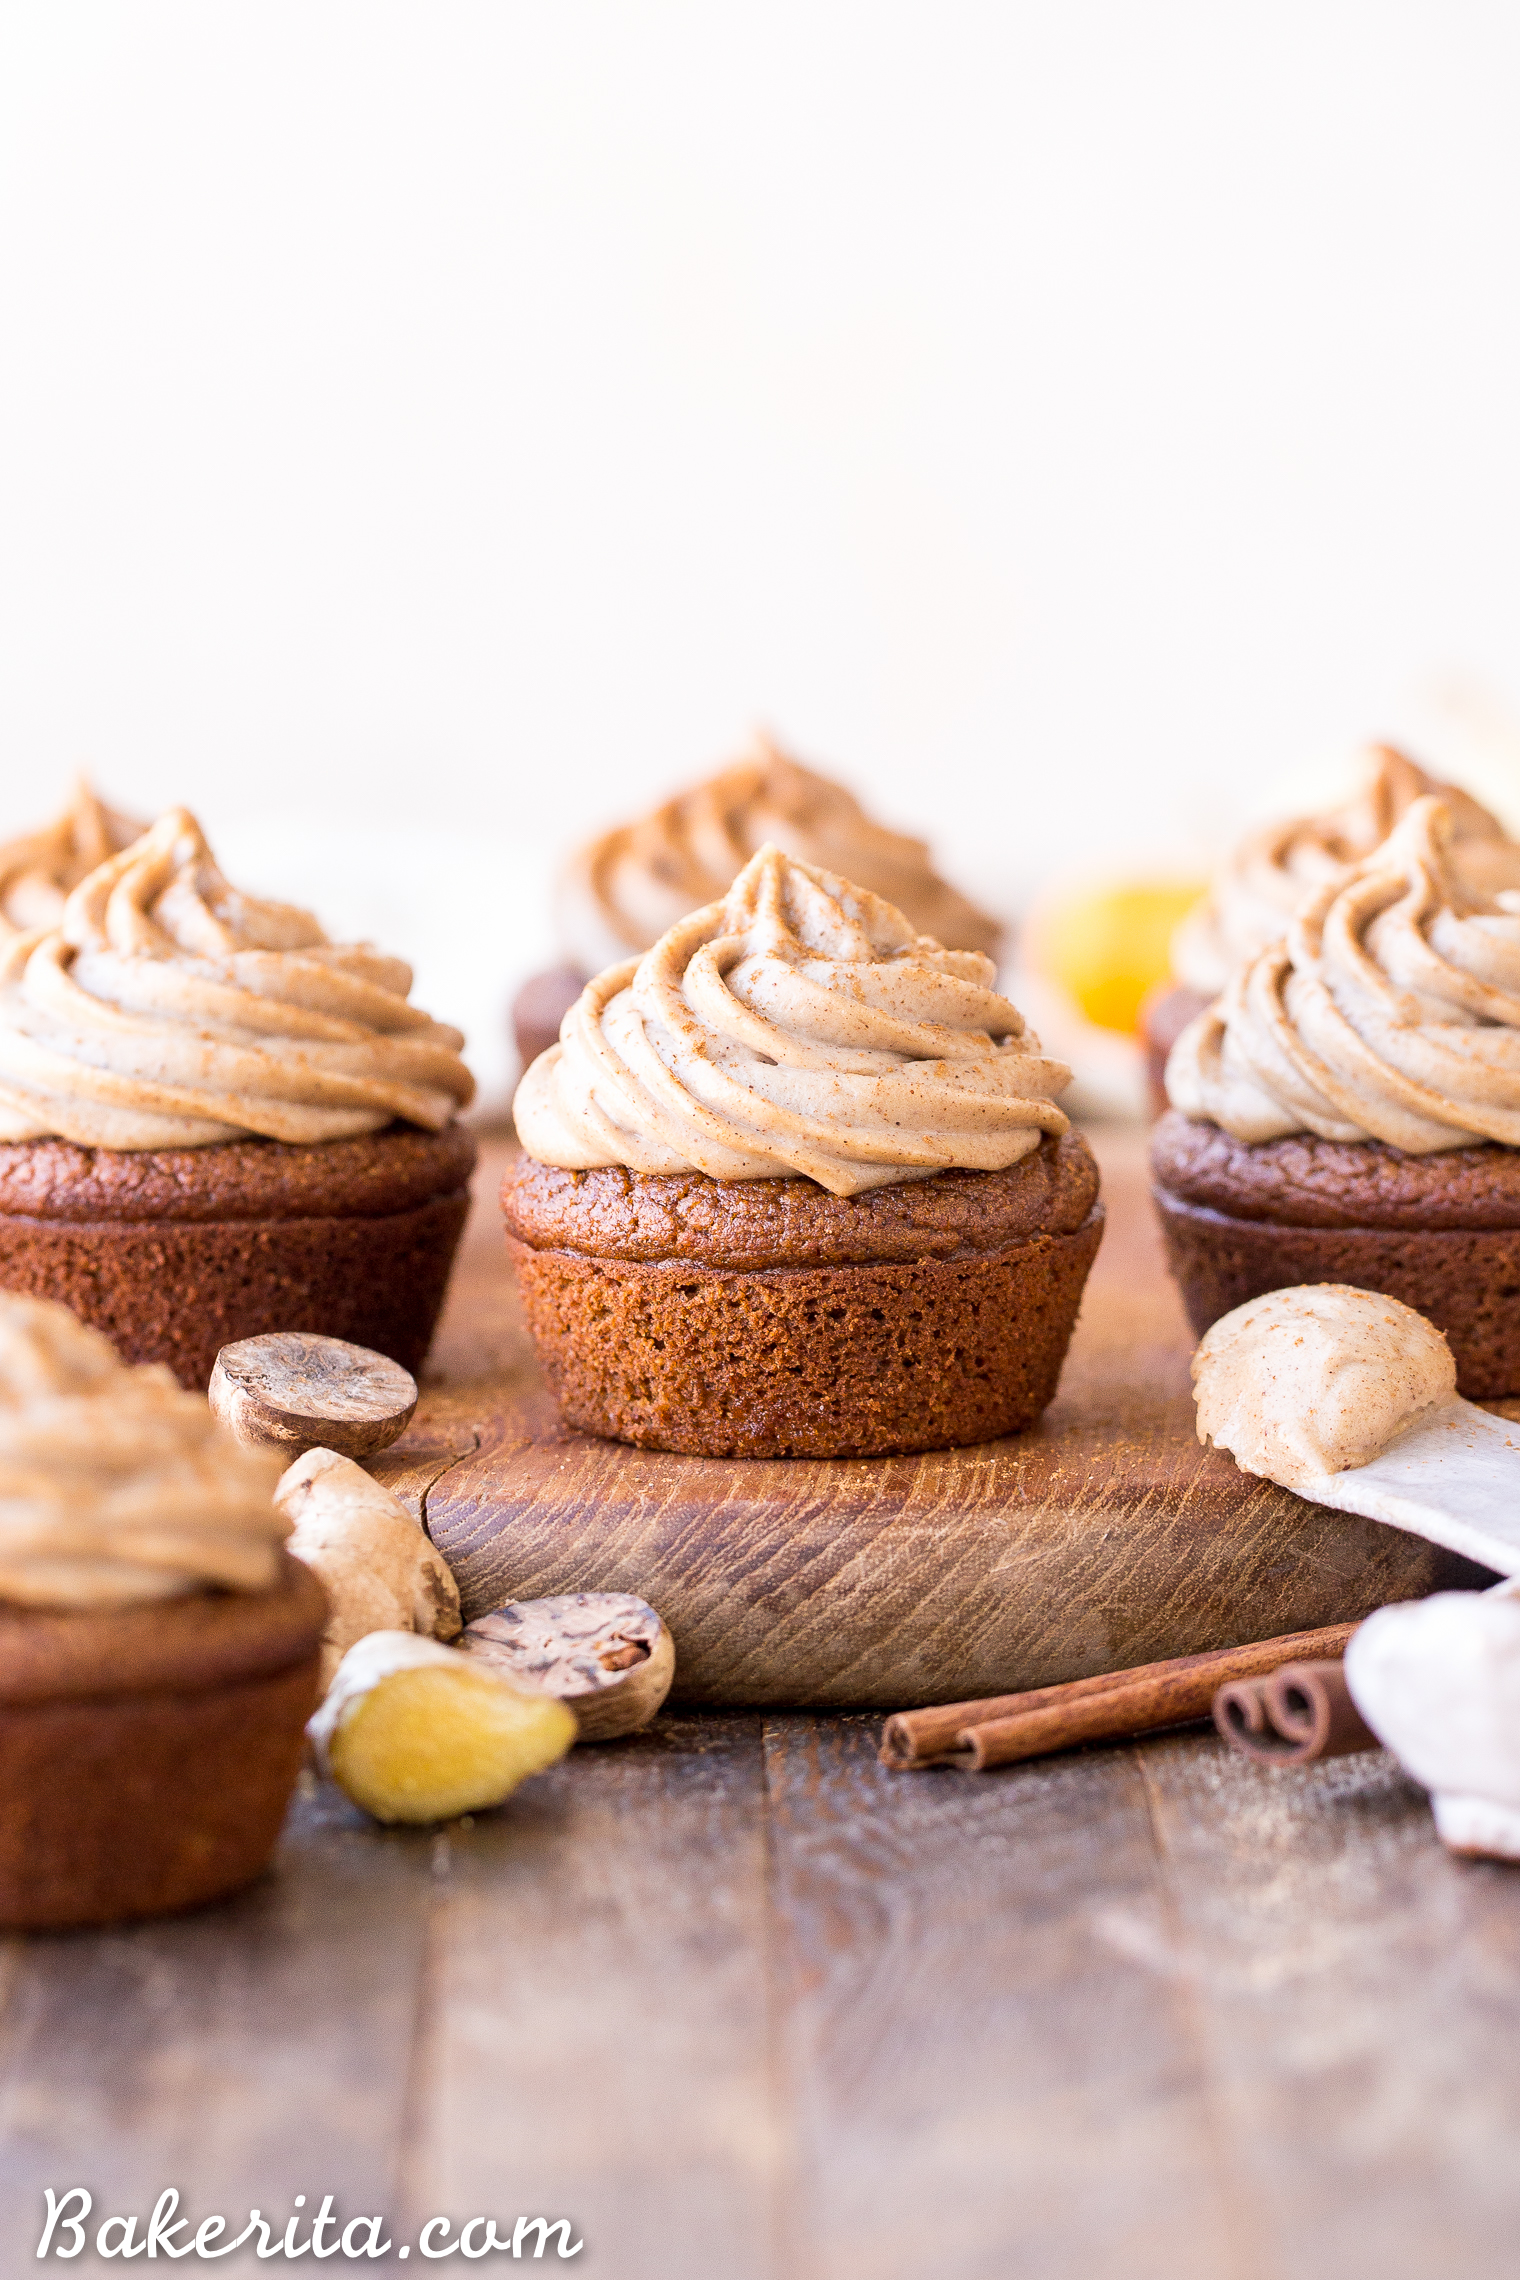 These Pumpkin Chai Cupcakes are soft, moist and bursting with warm chai spices and pumpkin flavor. They're topped with an irresistible cashew-based chai frosting that you'd never guess is paleo + vegan.